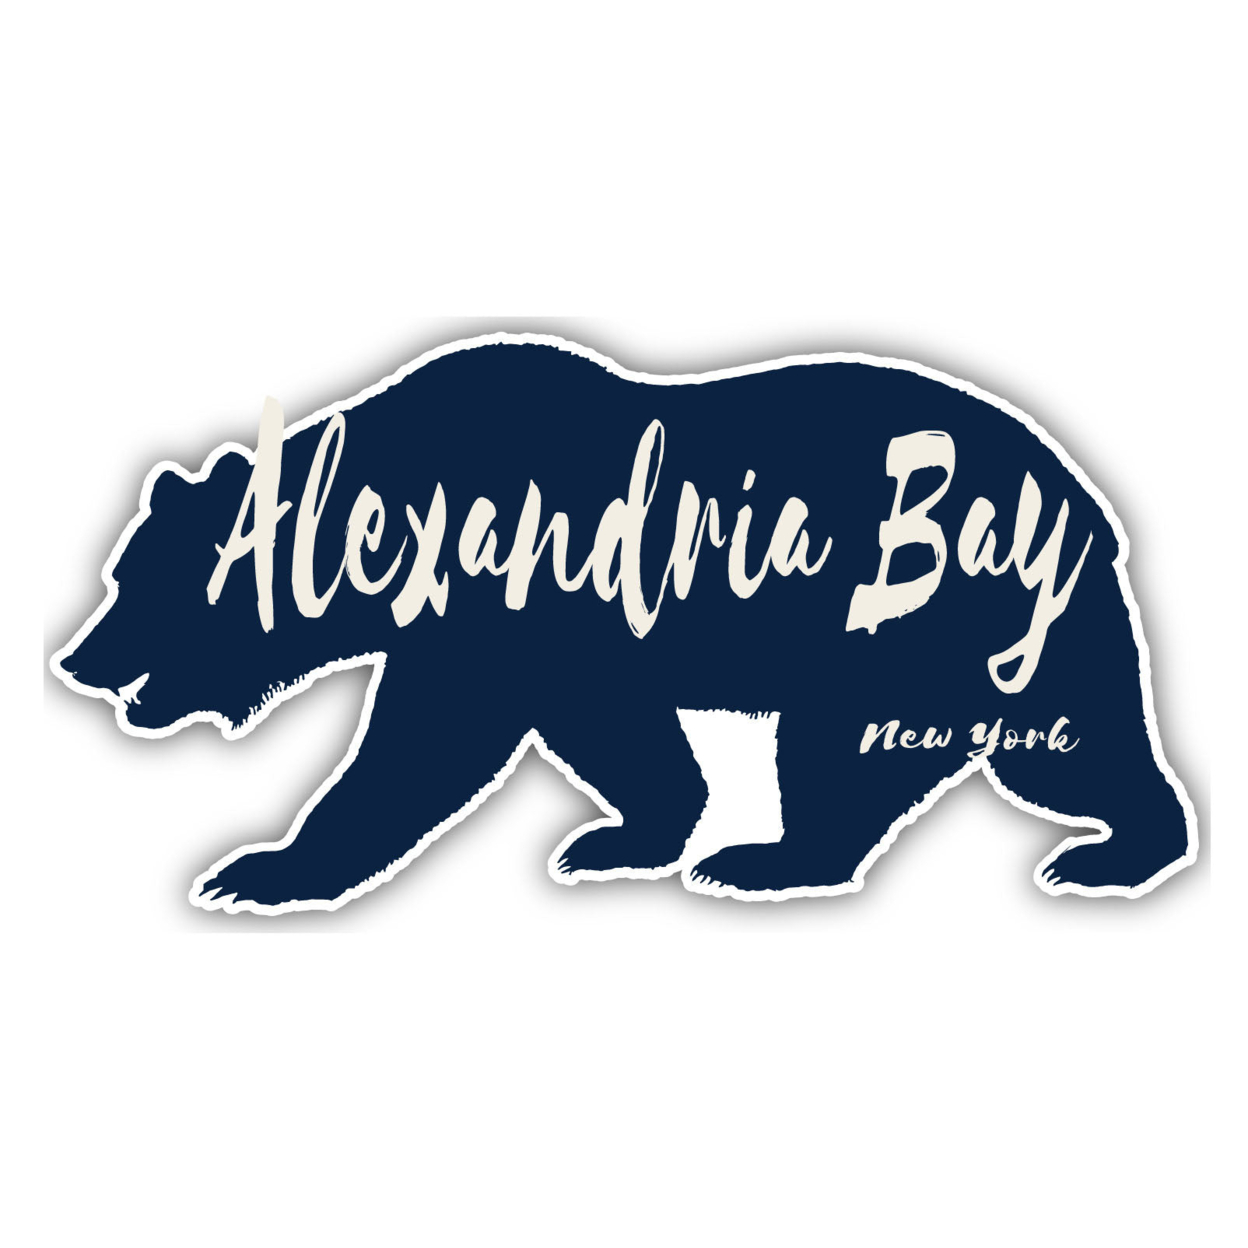 Alexandria Bay New York Souvenir Decorative Stickers (Choose Theme And Size) - 4-Pack, 2-Inch, Adventures Awaits